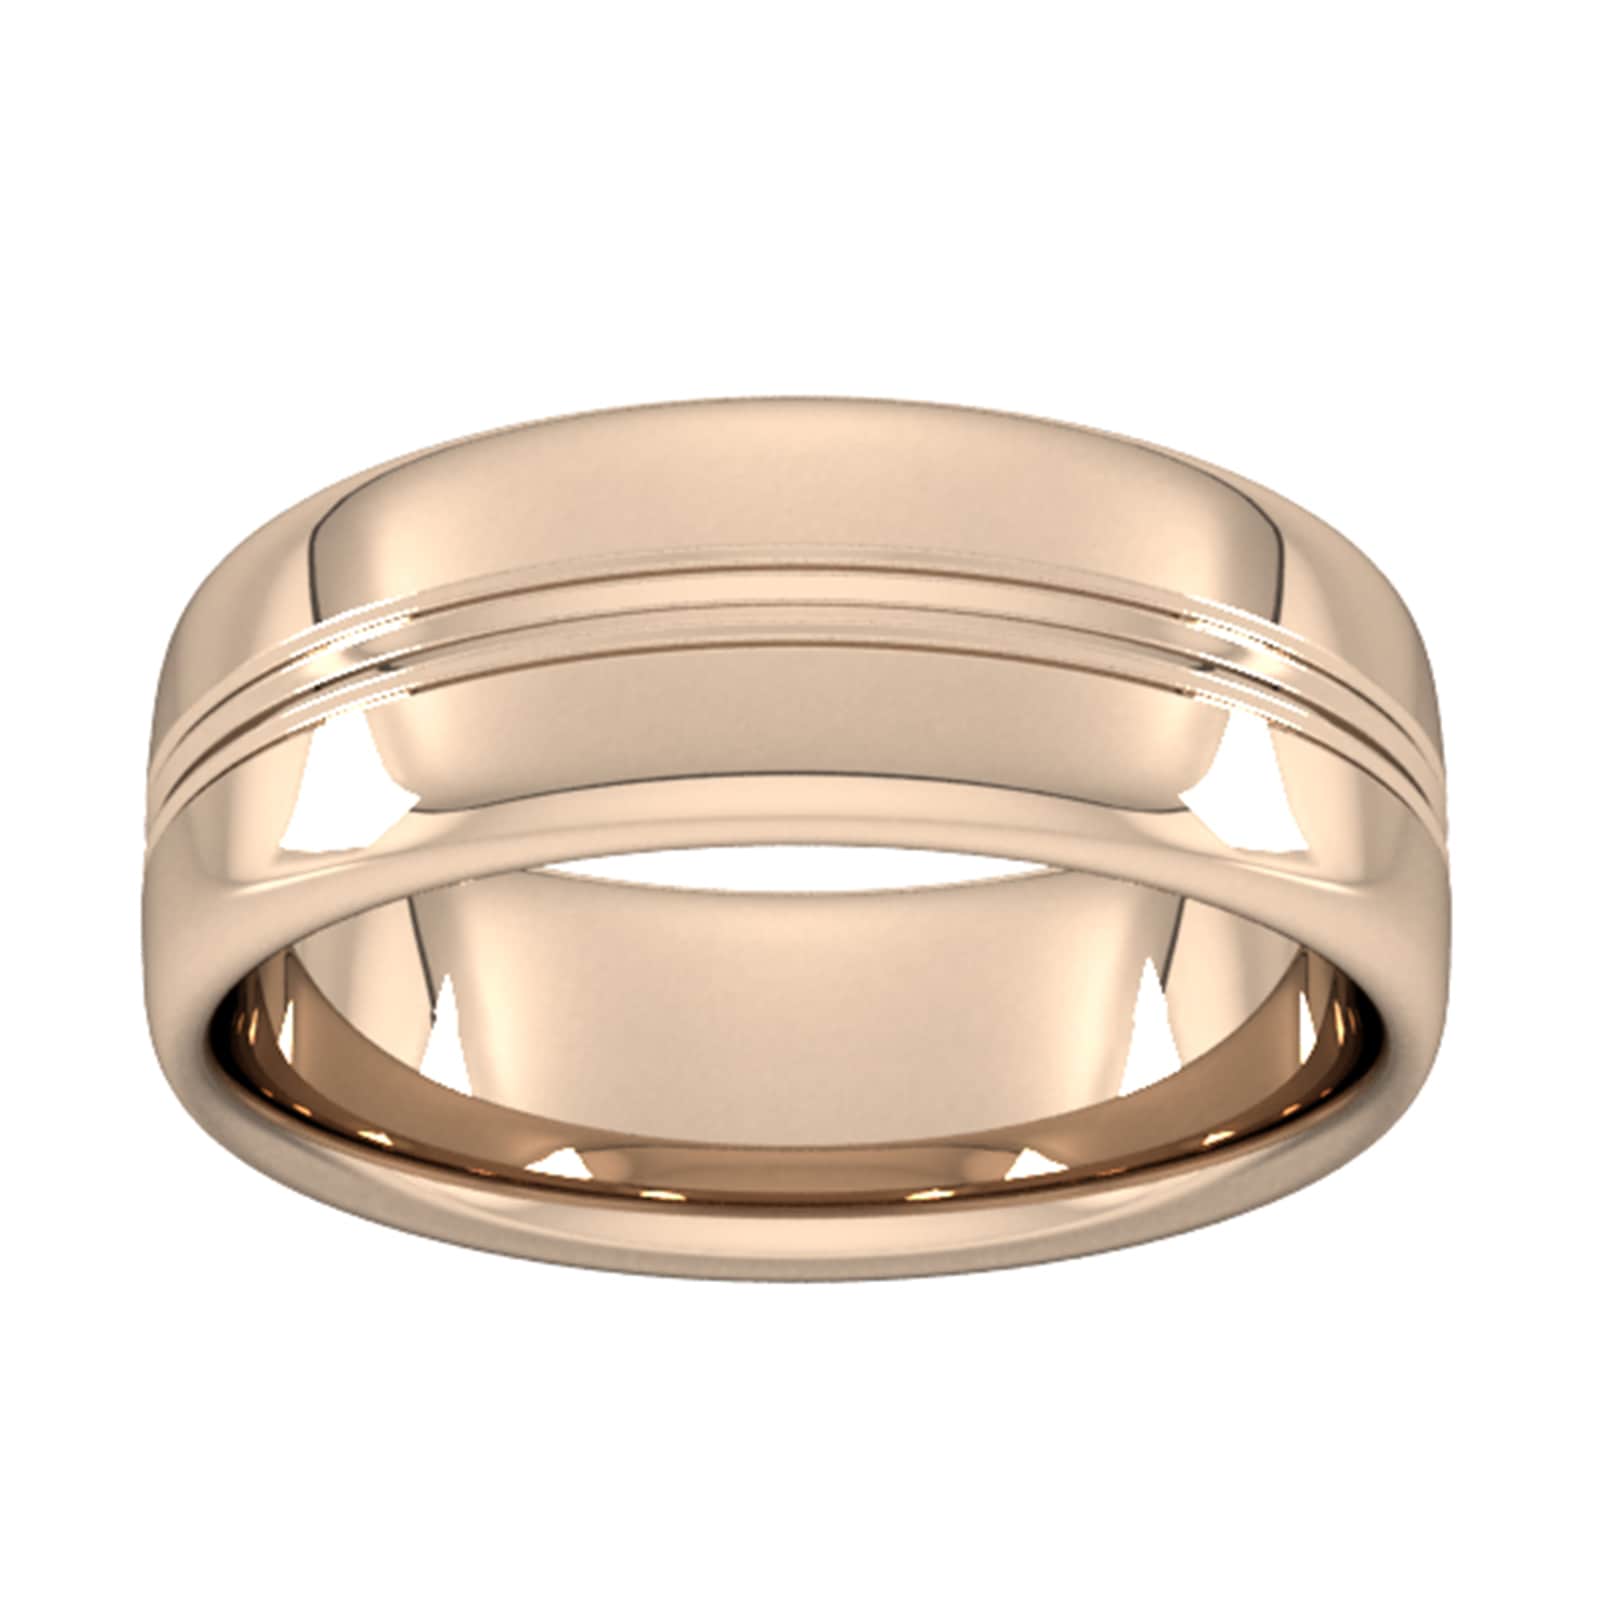 8mm Slight Court Heavy Grooved Polished Finish Wedding Ring In 18 Carat Rose Gold - Ring Size I